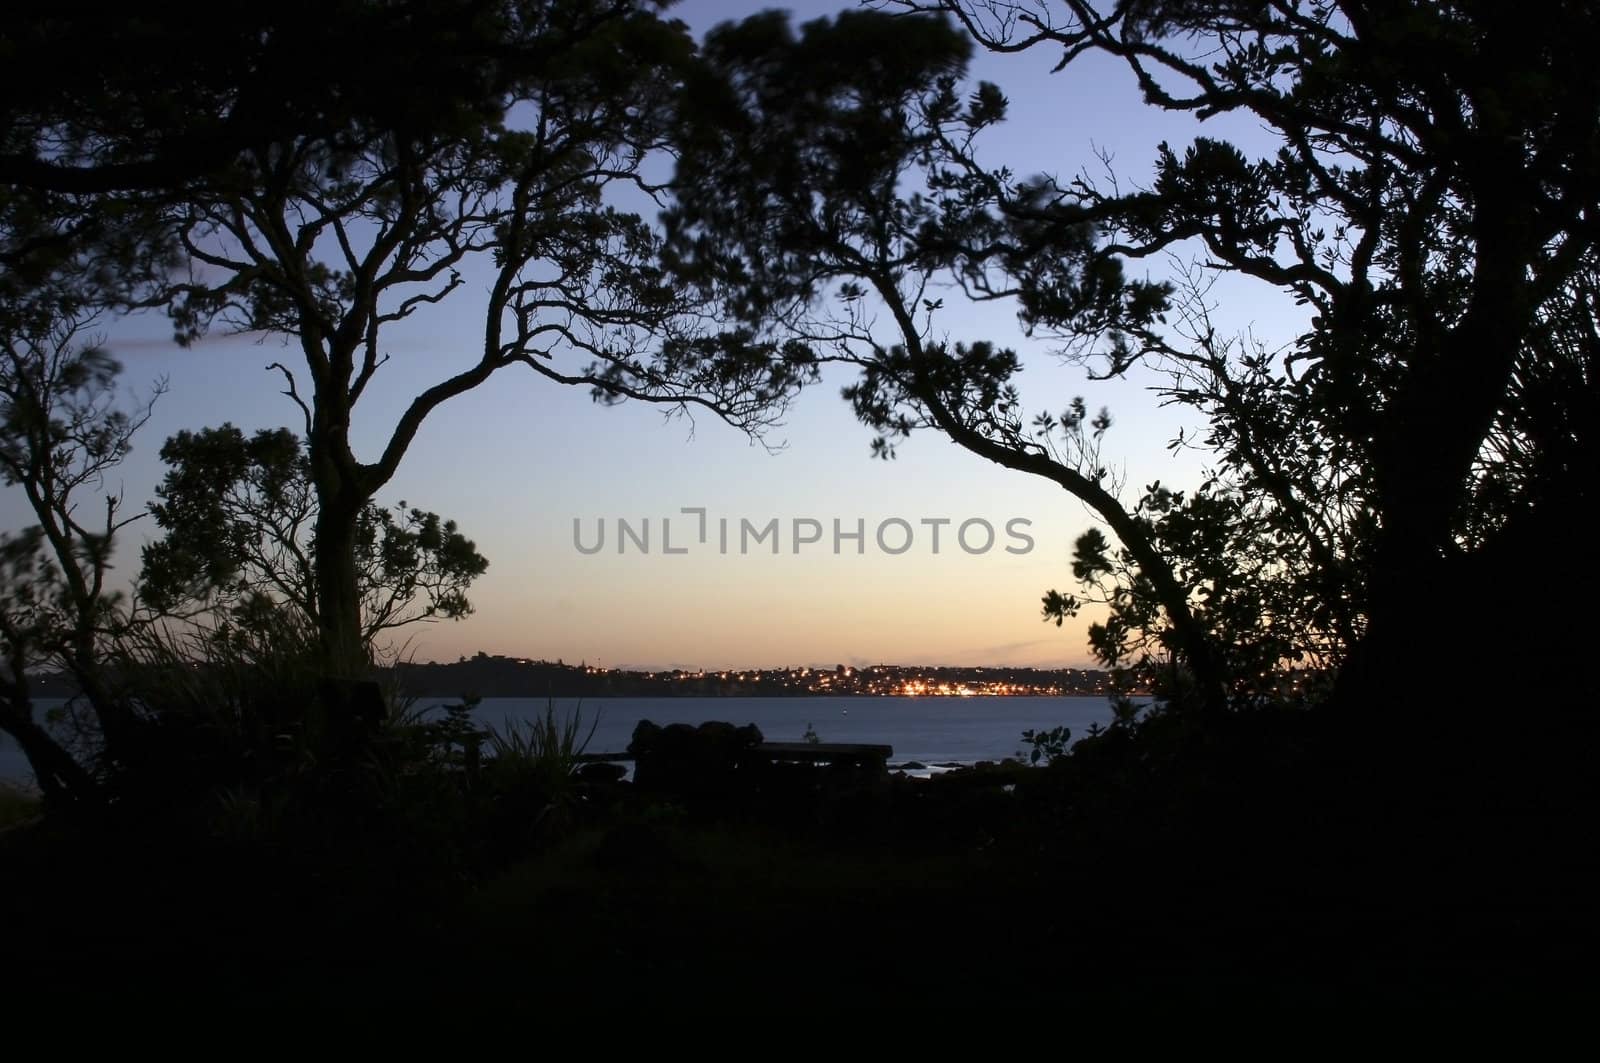 Pohutukawa trees silhoutted (sp?) at evening on Rangitoto Island, New Zealand. Auckland City in distance.